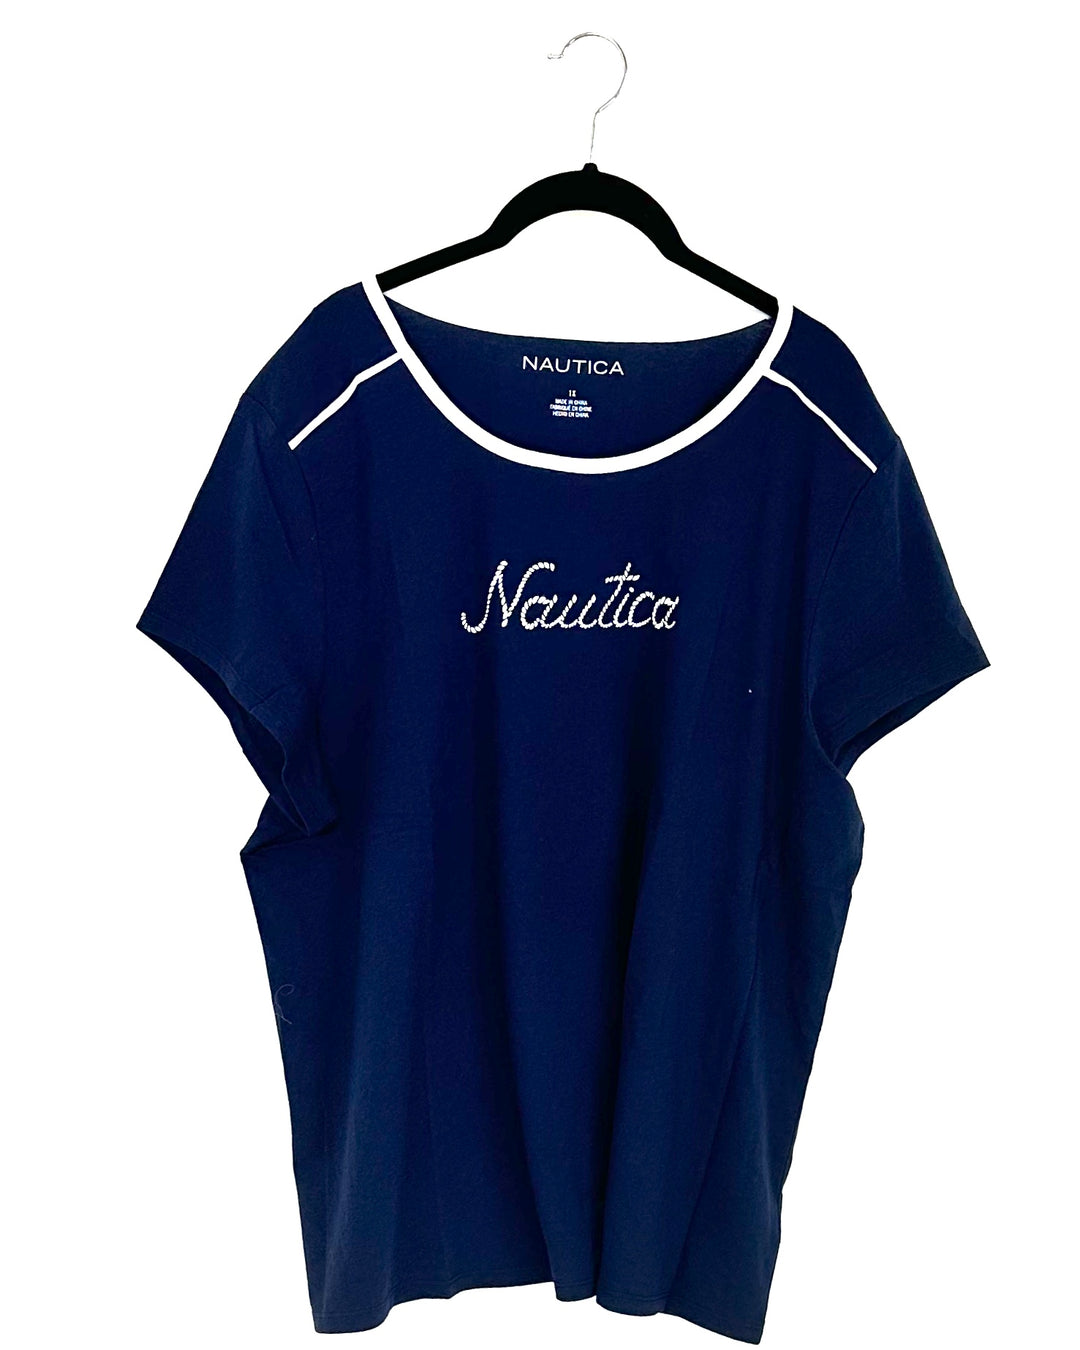 Navy Blue T-Shirt - Small and 1X